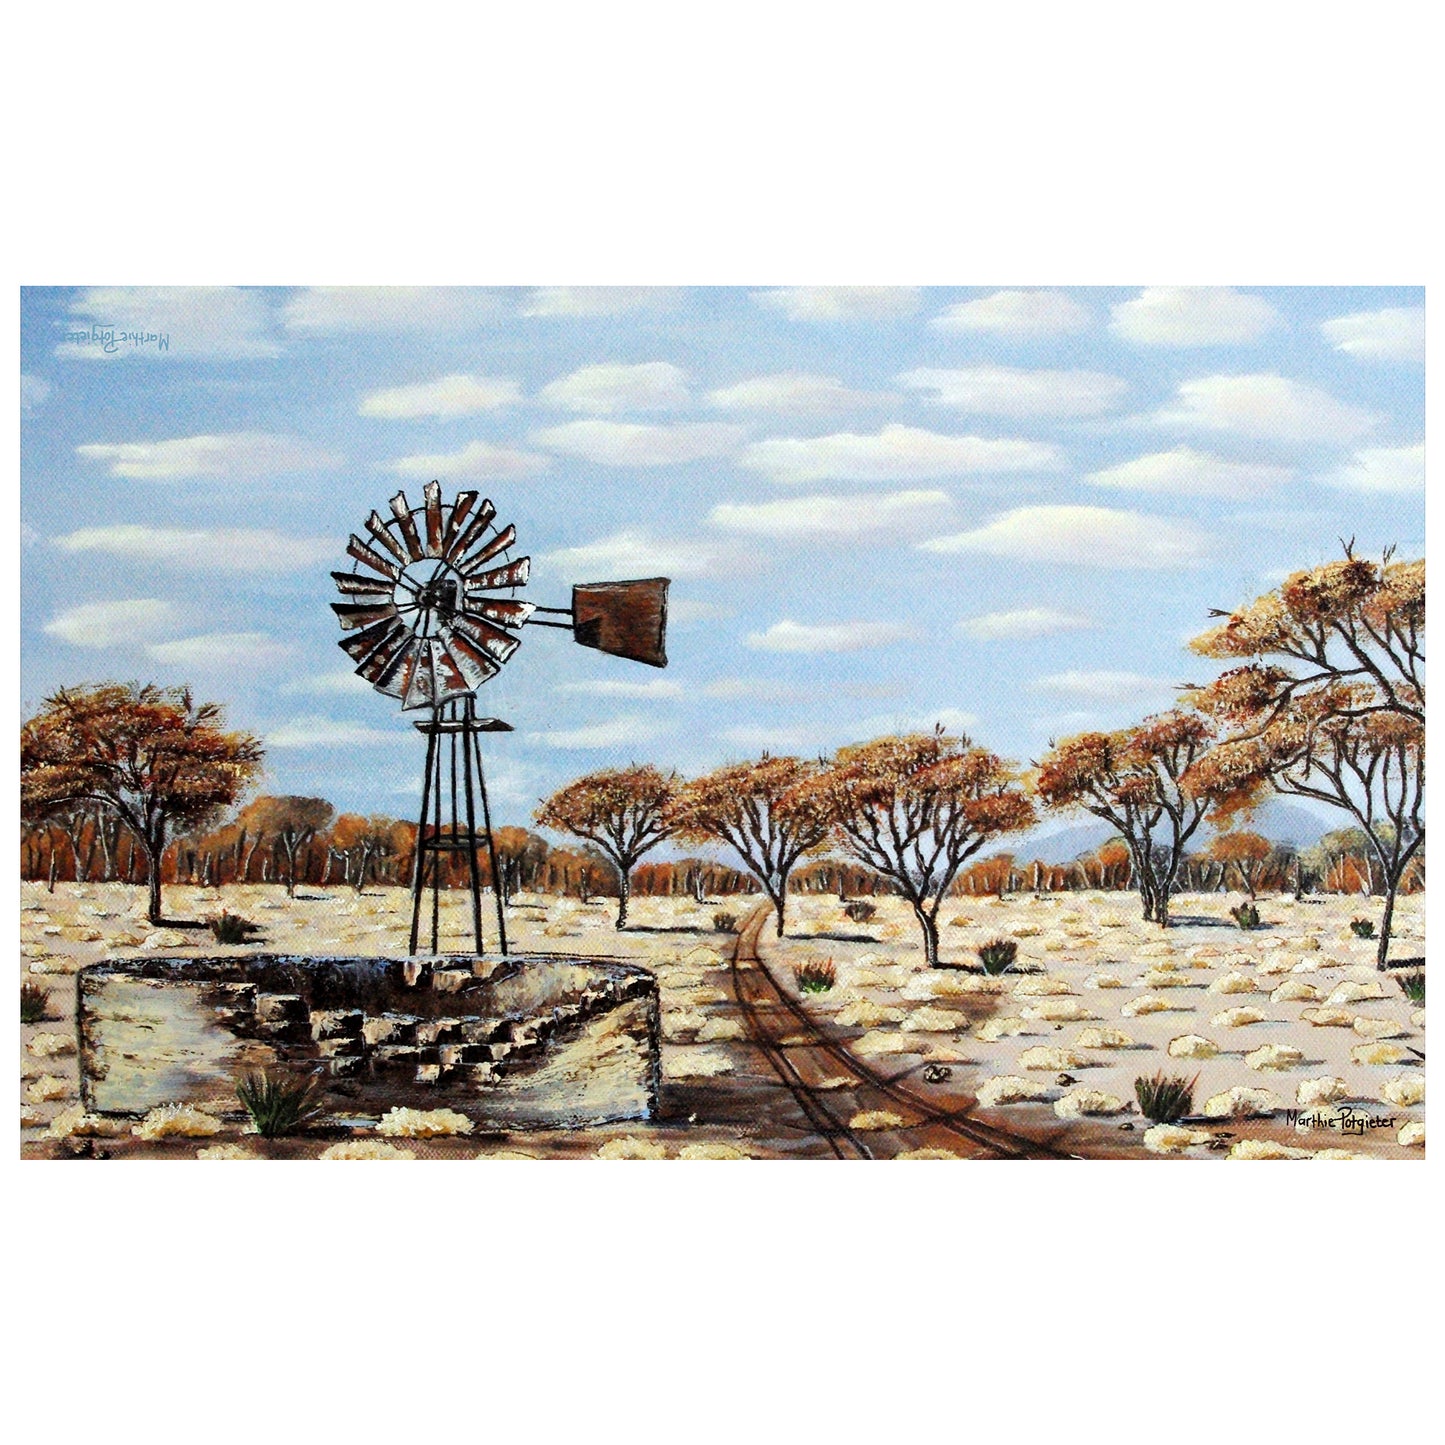 Dry Windmill Dam By Marthie Potgieter Rectangle Tablecloth